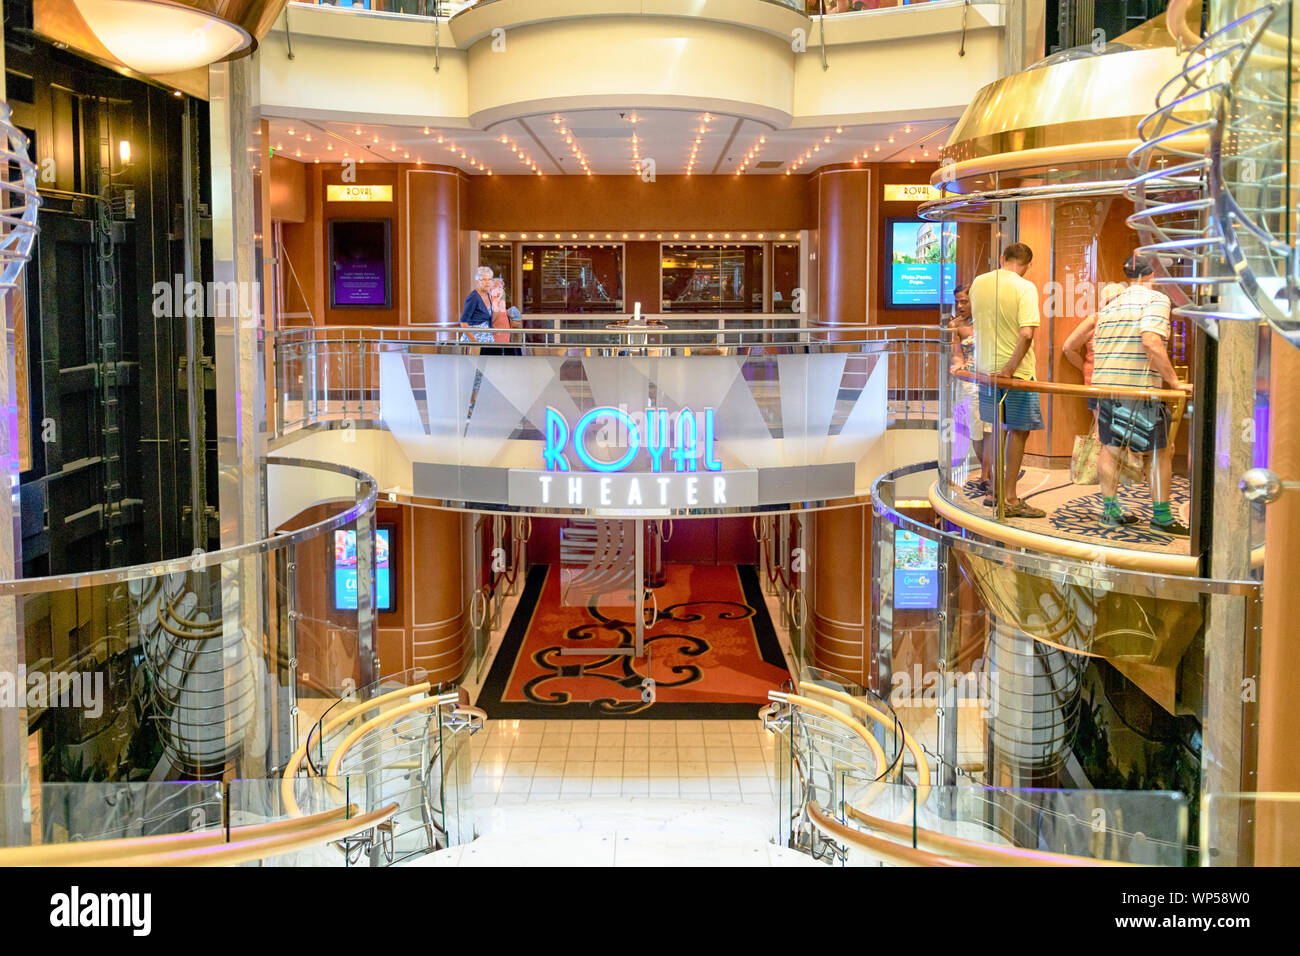 Independence of the seas Entrance to the Royal Theatre interior inside Royal Caribbean cruise ship Independence of the seas Stock Photo